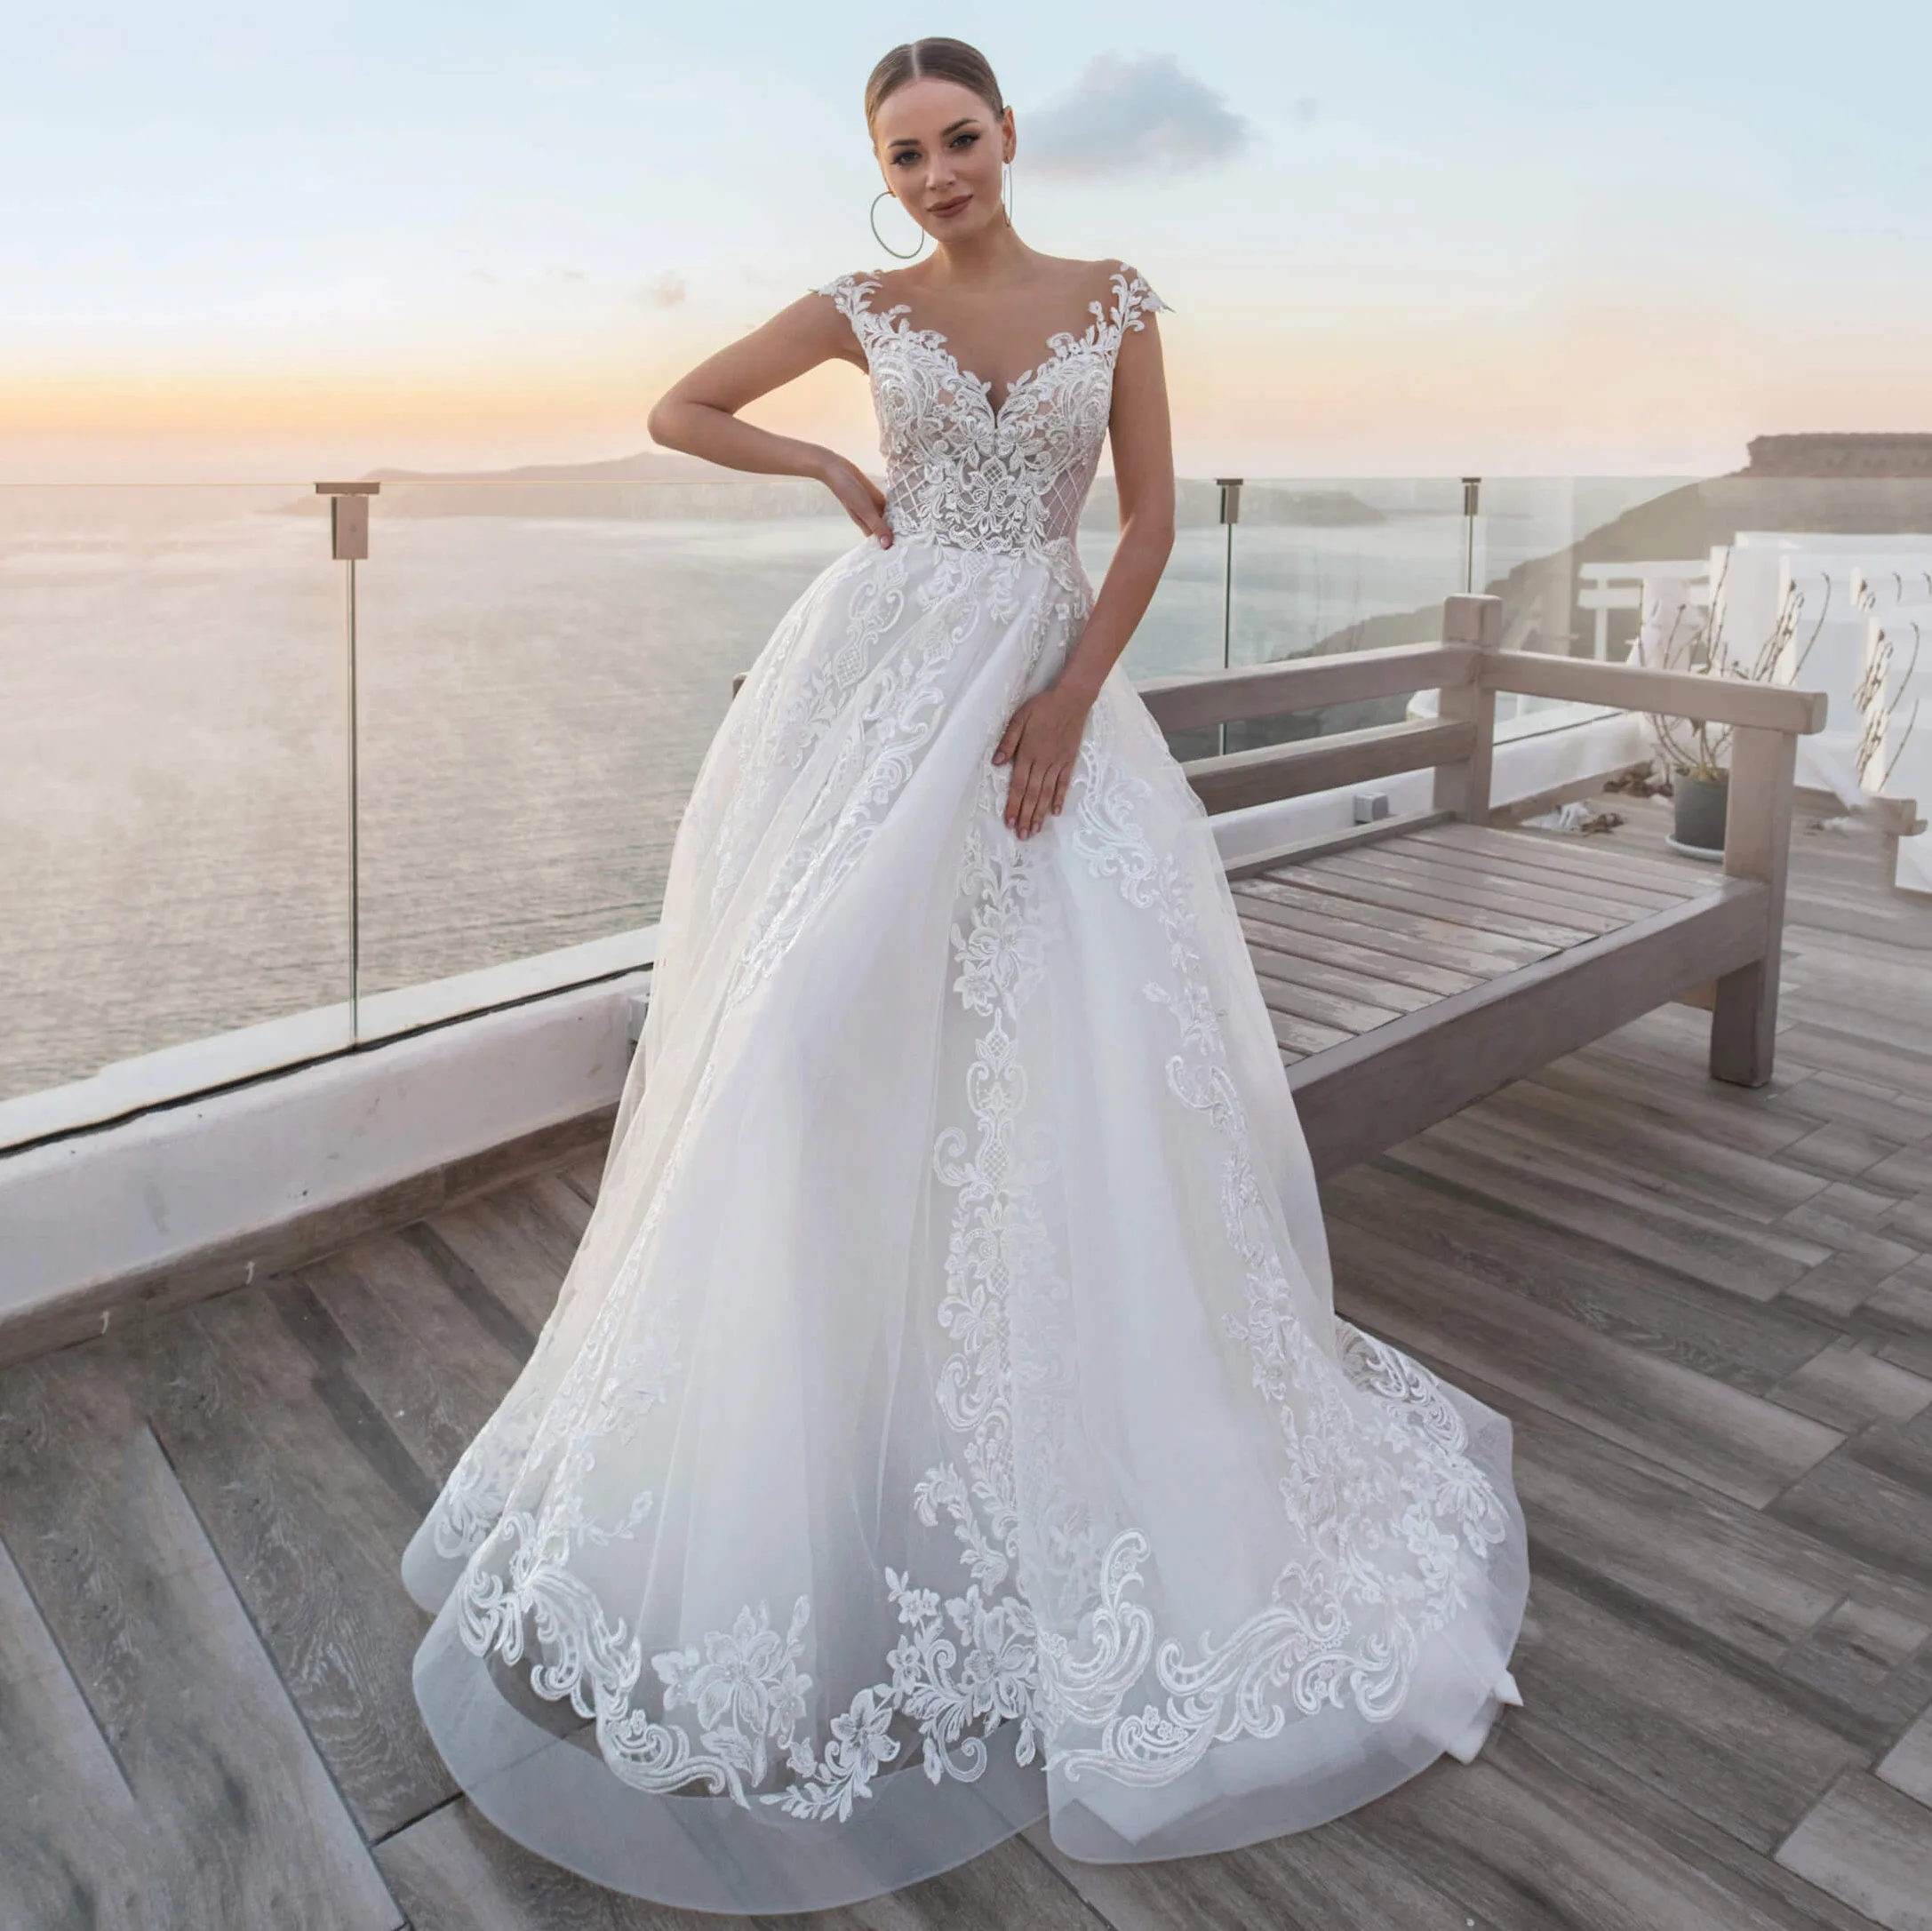 

Thinyfull 2020 Elegant Wedding Dresses A Line Sheer Scoop Neck Cap Sleeve Bride Dresses Tulle Button Lace Appliques Bridal Gown